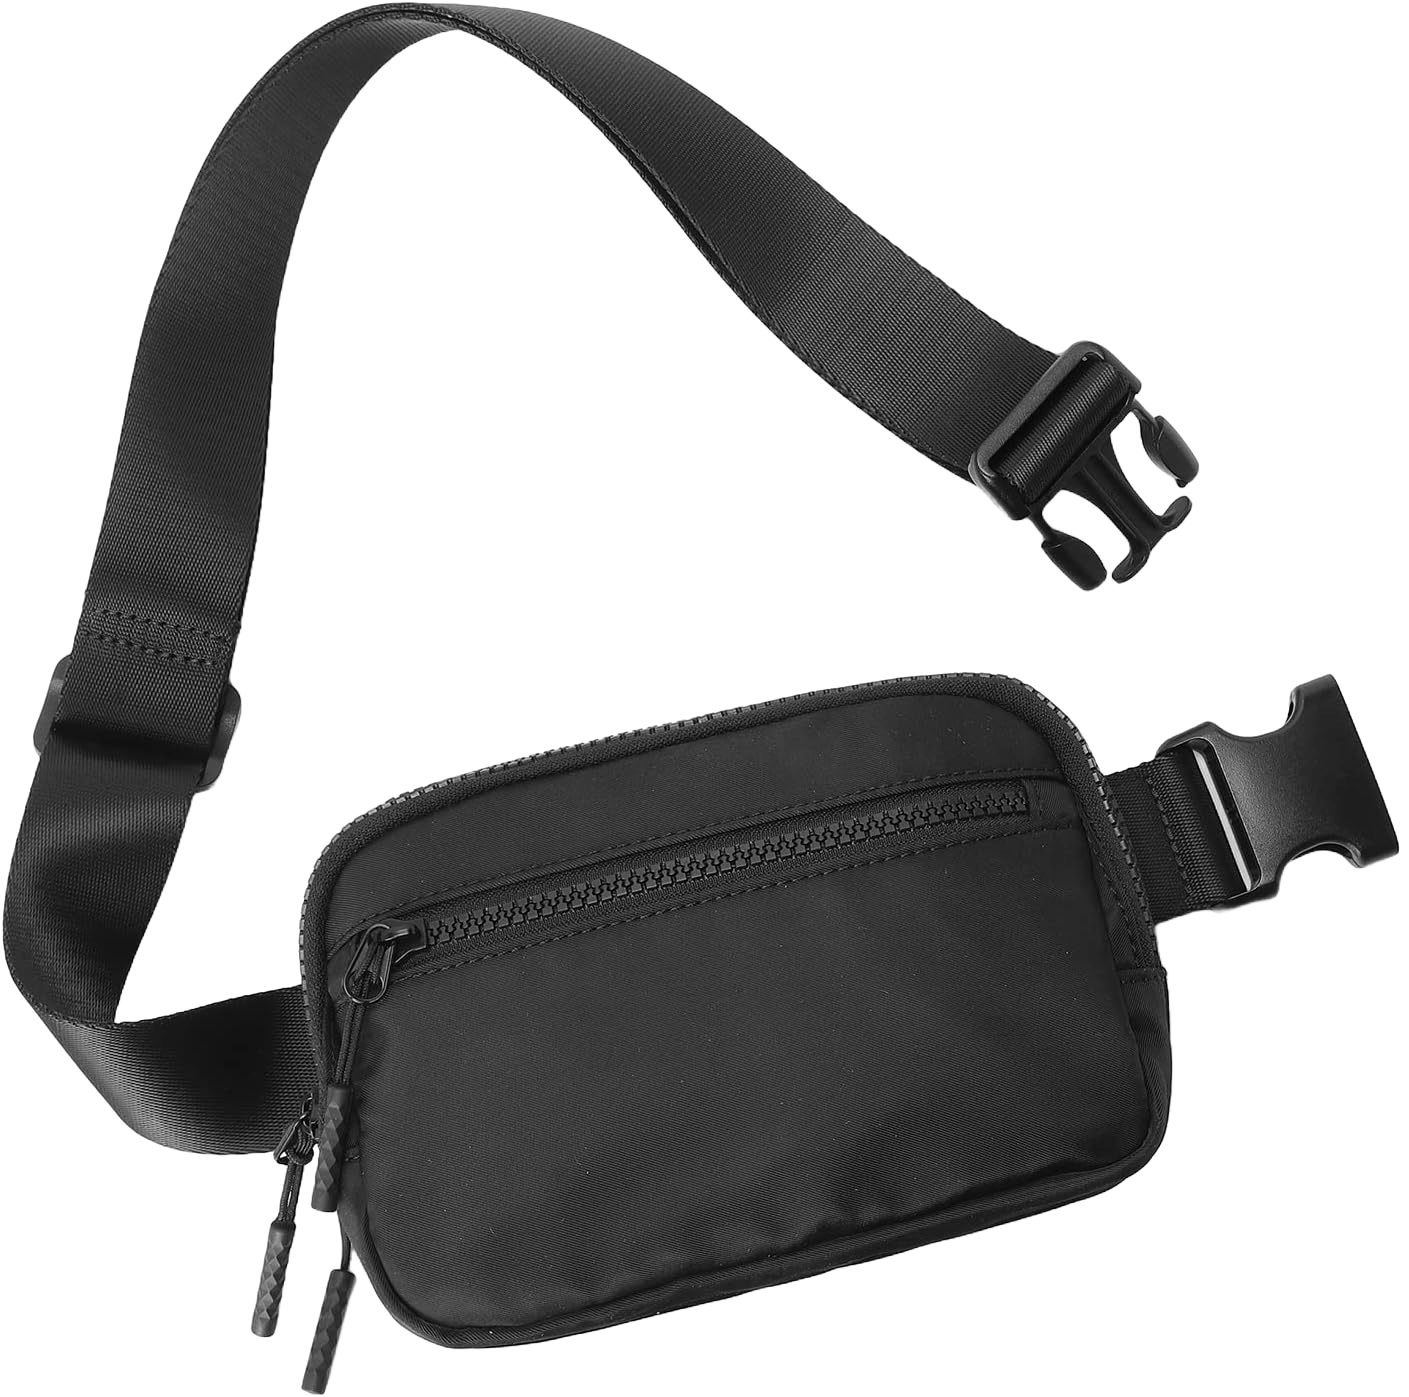 westbronco fanny pack dupe